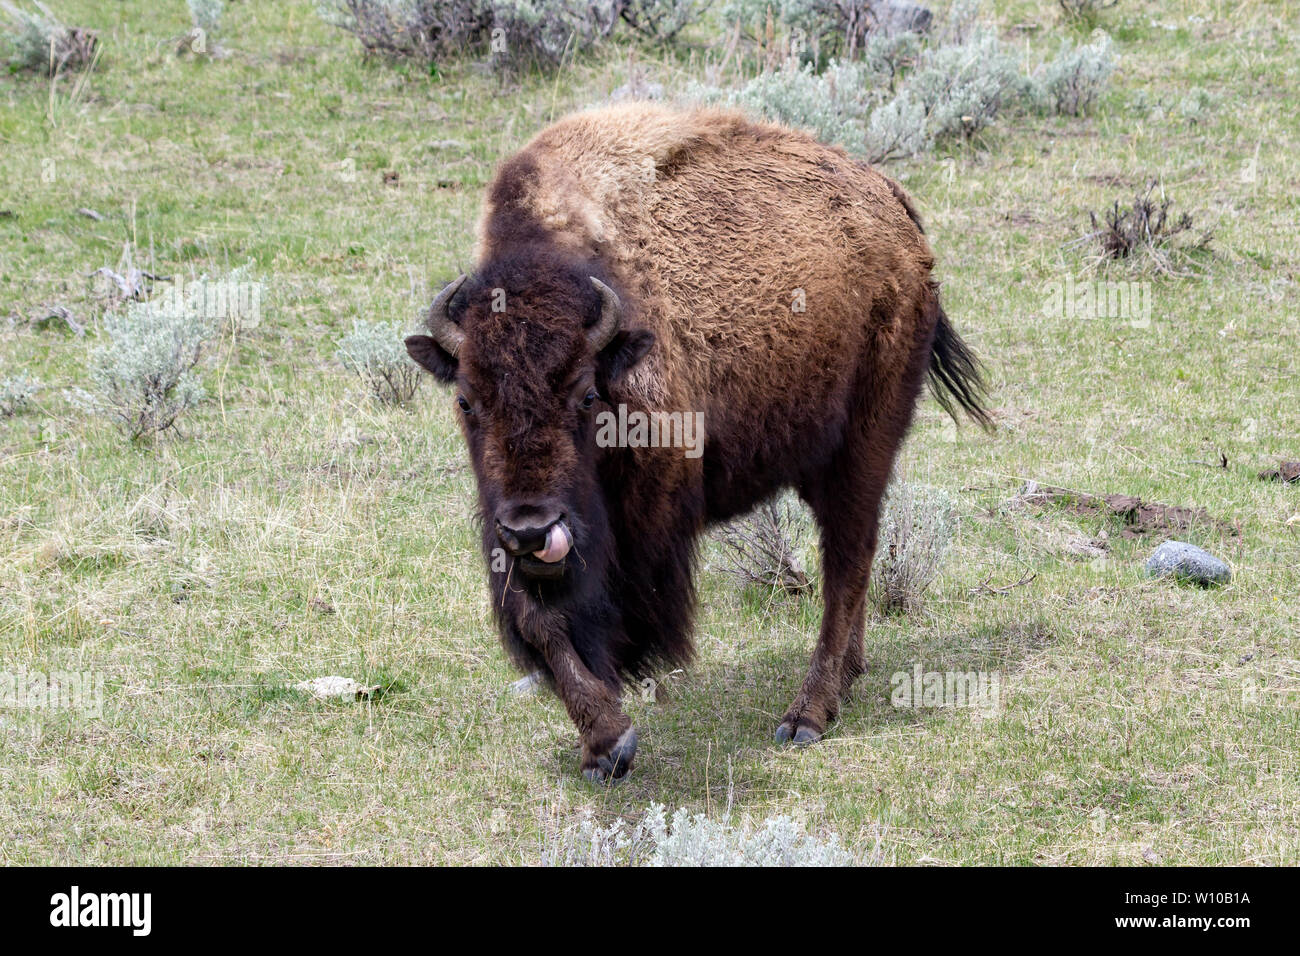 Bison (Bison bison) in the Lamar Valley of Yellowstone National Park Stock Photo